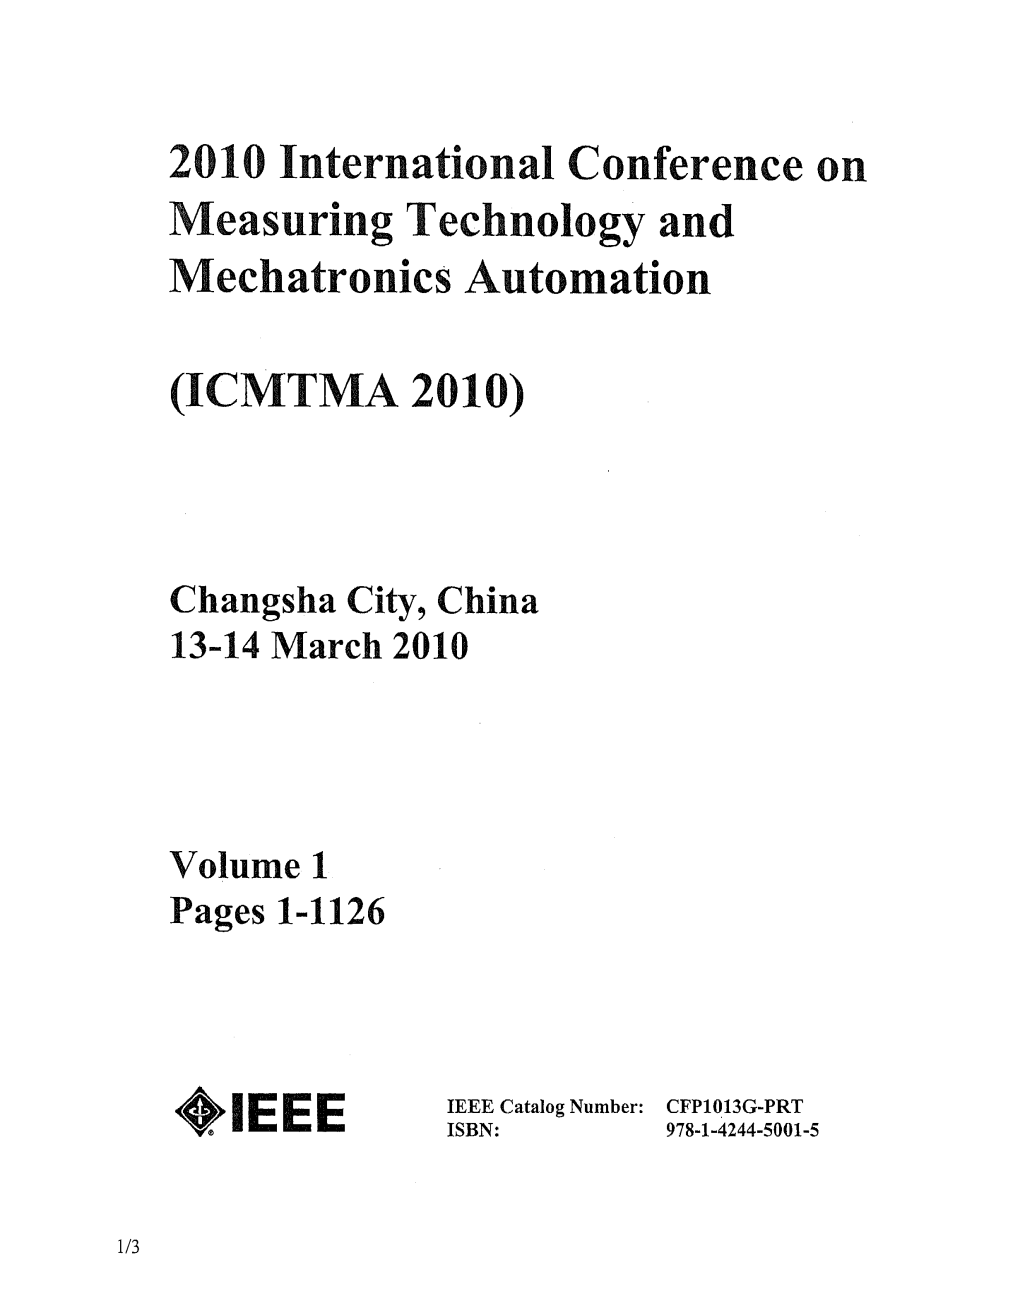 2010 International Conference on Measuring Technology and Mechatronics Automation